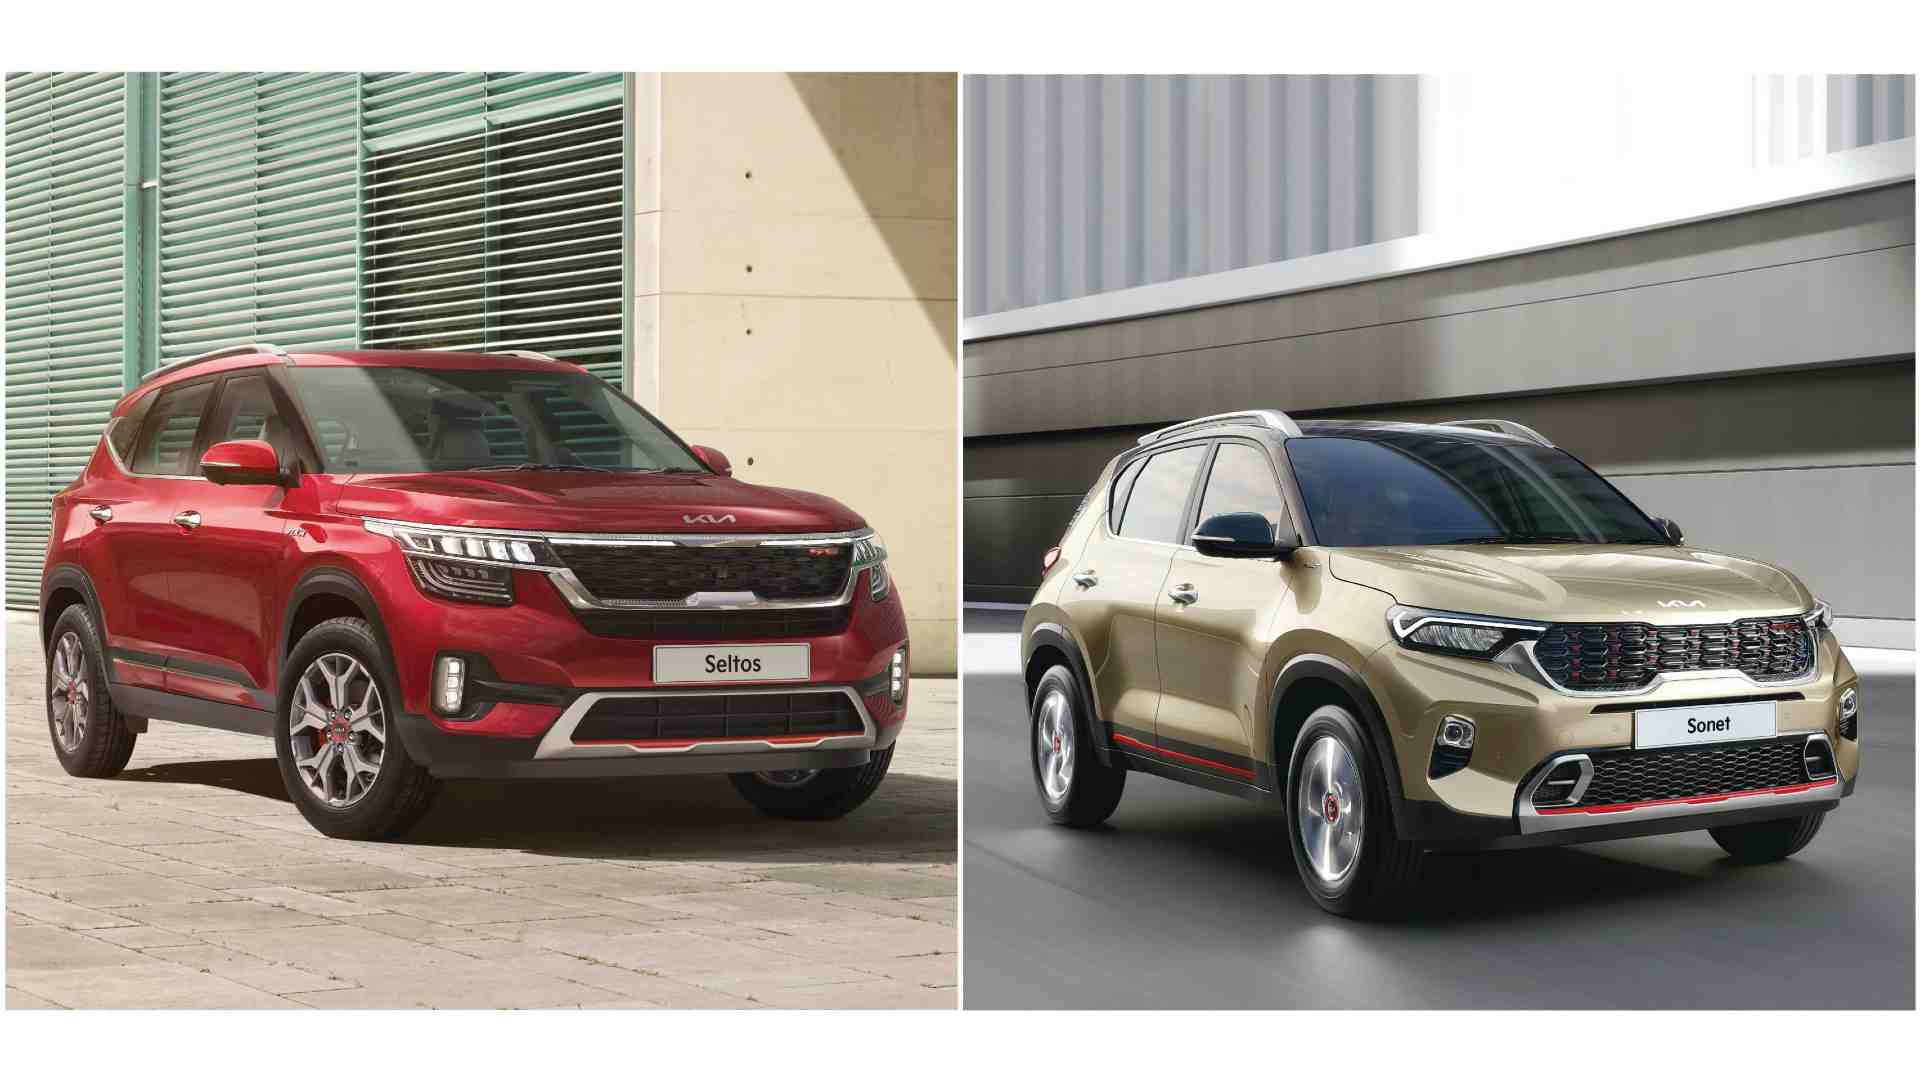 Both the 2021 Kia Seltos as well as the Kia Sonet now offer electronic stability control in a wider range of variants. Image: Kia